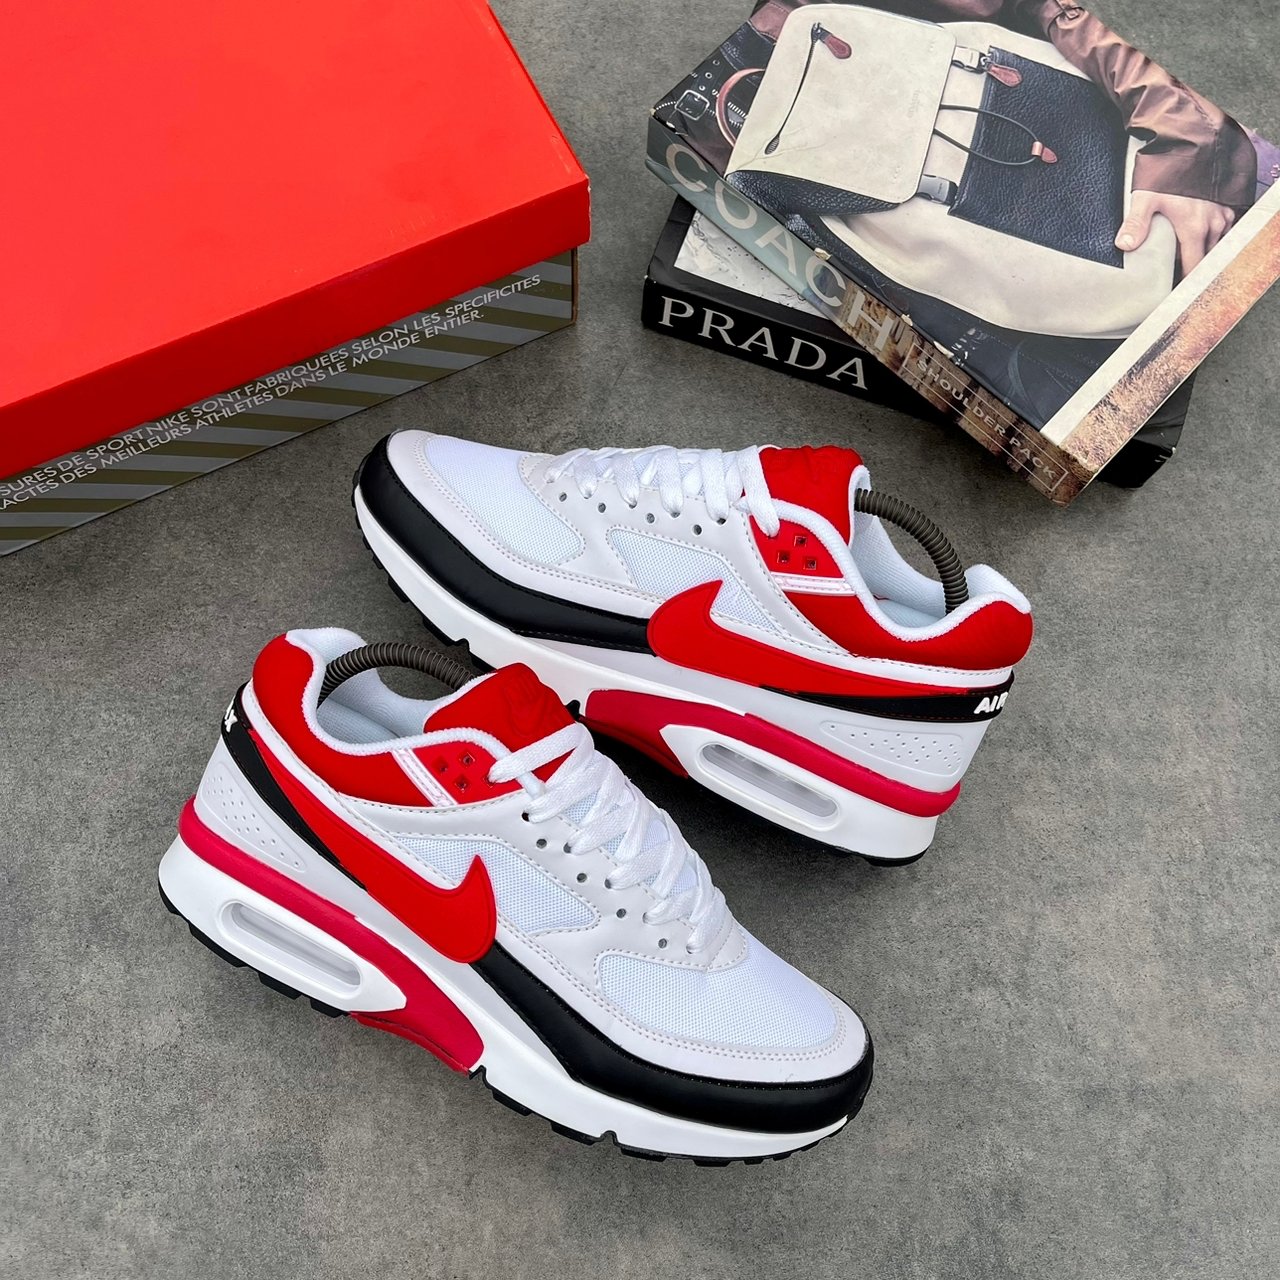 KT on X: "Nike BW Trainers With an unit 10% discount Phone/WhatsApp : 08039562419 Telegram:https://t.co/aa7W48b3ZK ​Pls DM/ nationwide delivery https://t.co/IYotu9T1rf" / X